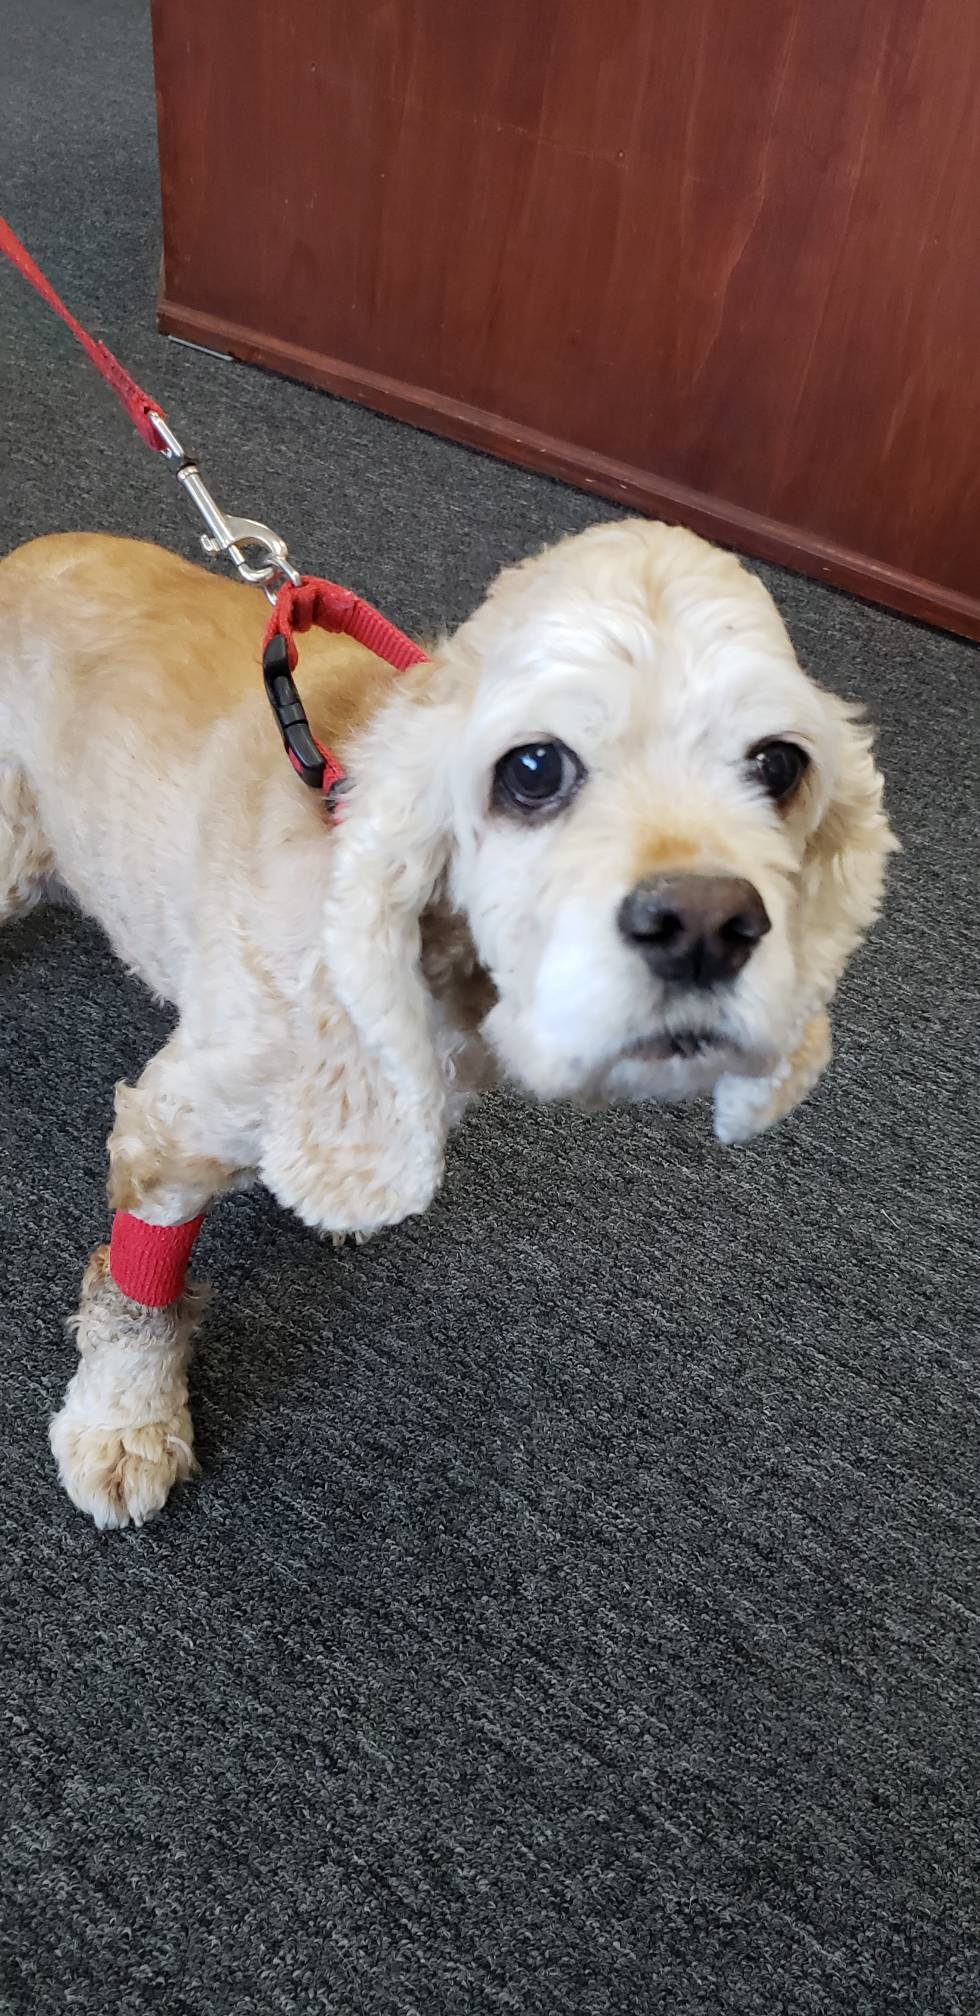 Meet Daisy the Cocker Spaniel. Daisy is coming to the healing place and receiving Ozone therapy for protein losing enteropathy